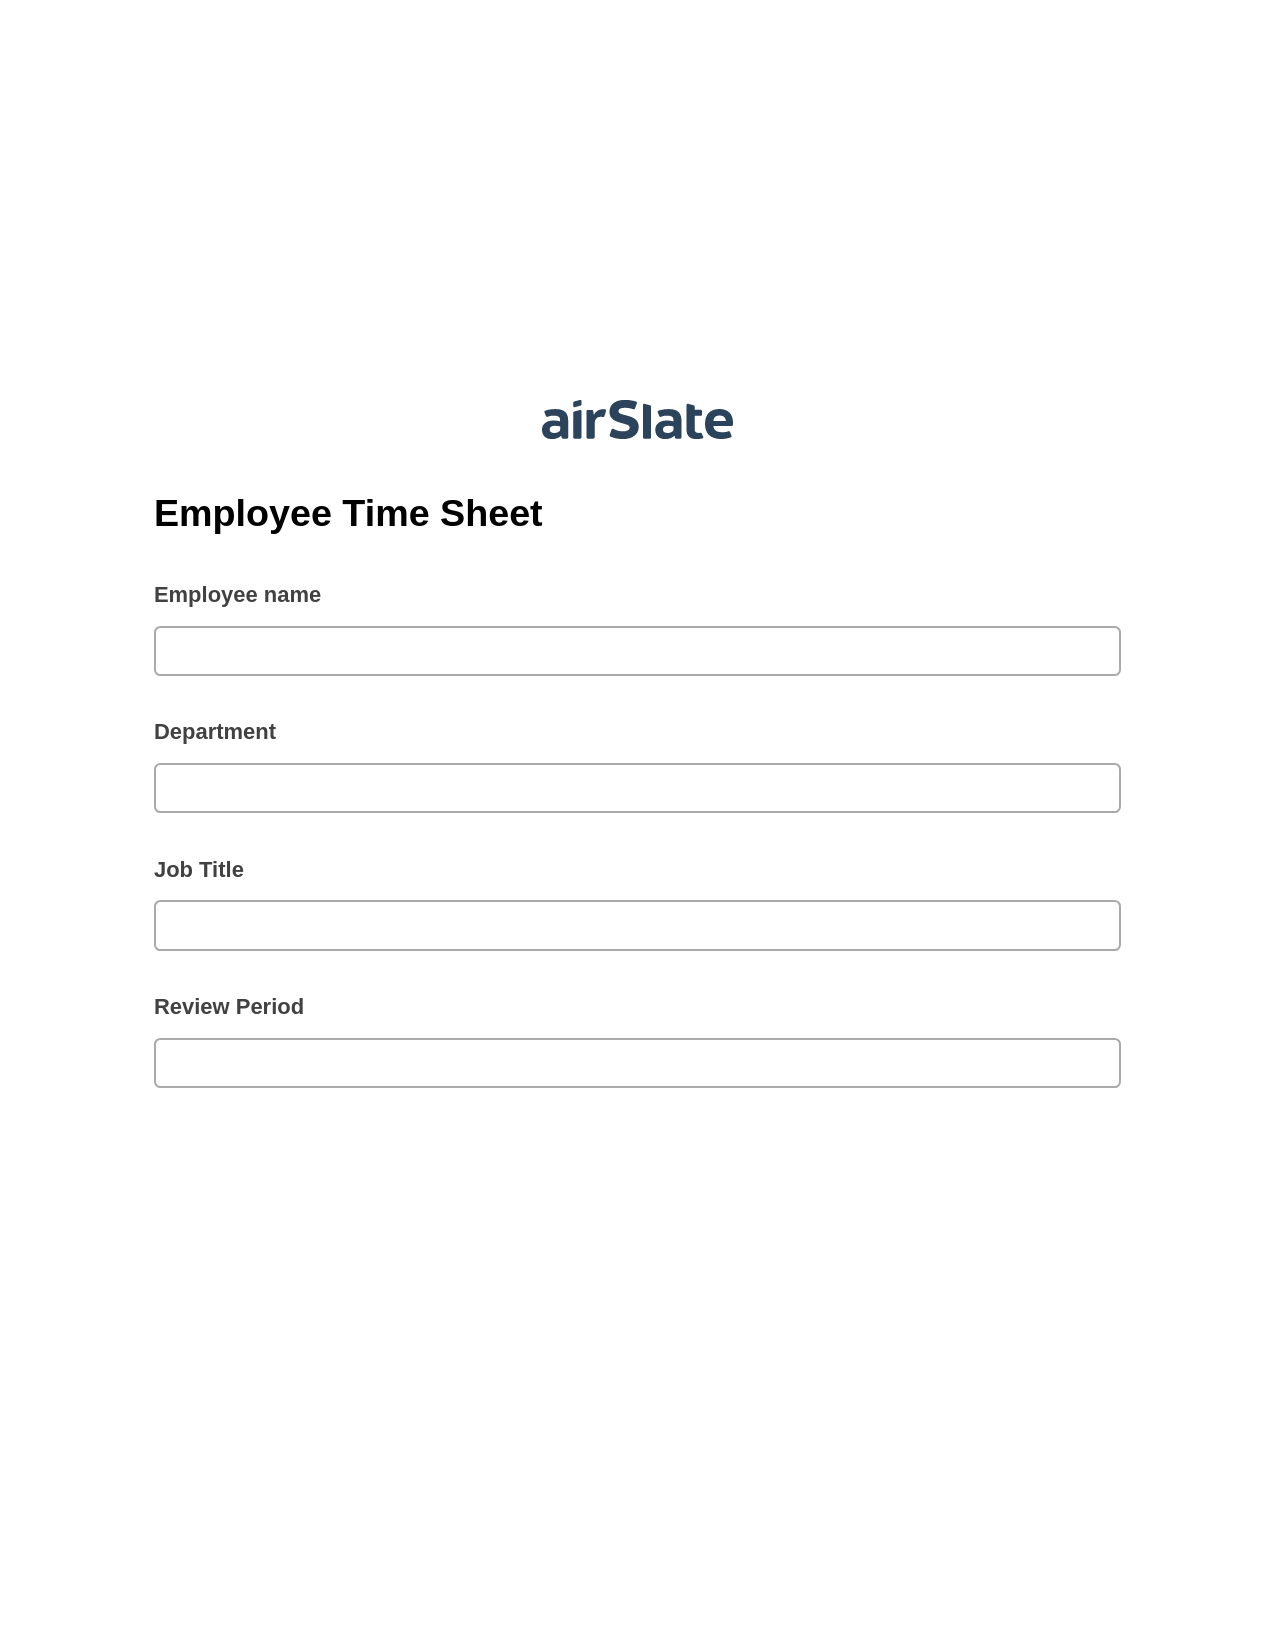 Multirole Employee Time Sheet Pre-fill from MS Dynamics 365 Records, Update Audit Trail Bot, Email Notification Postfinish Bot